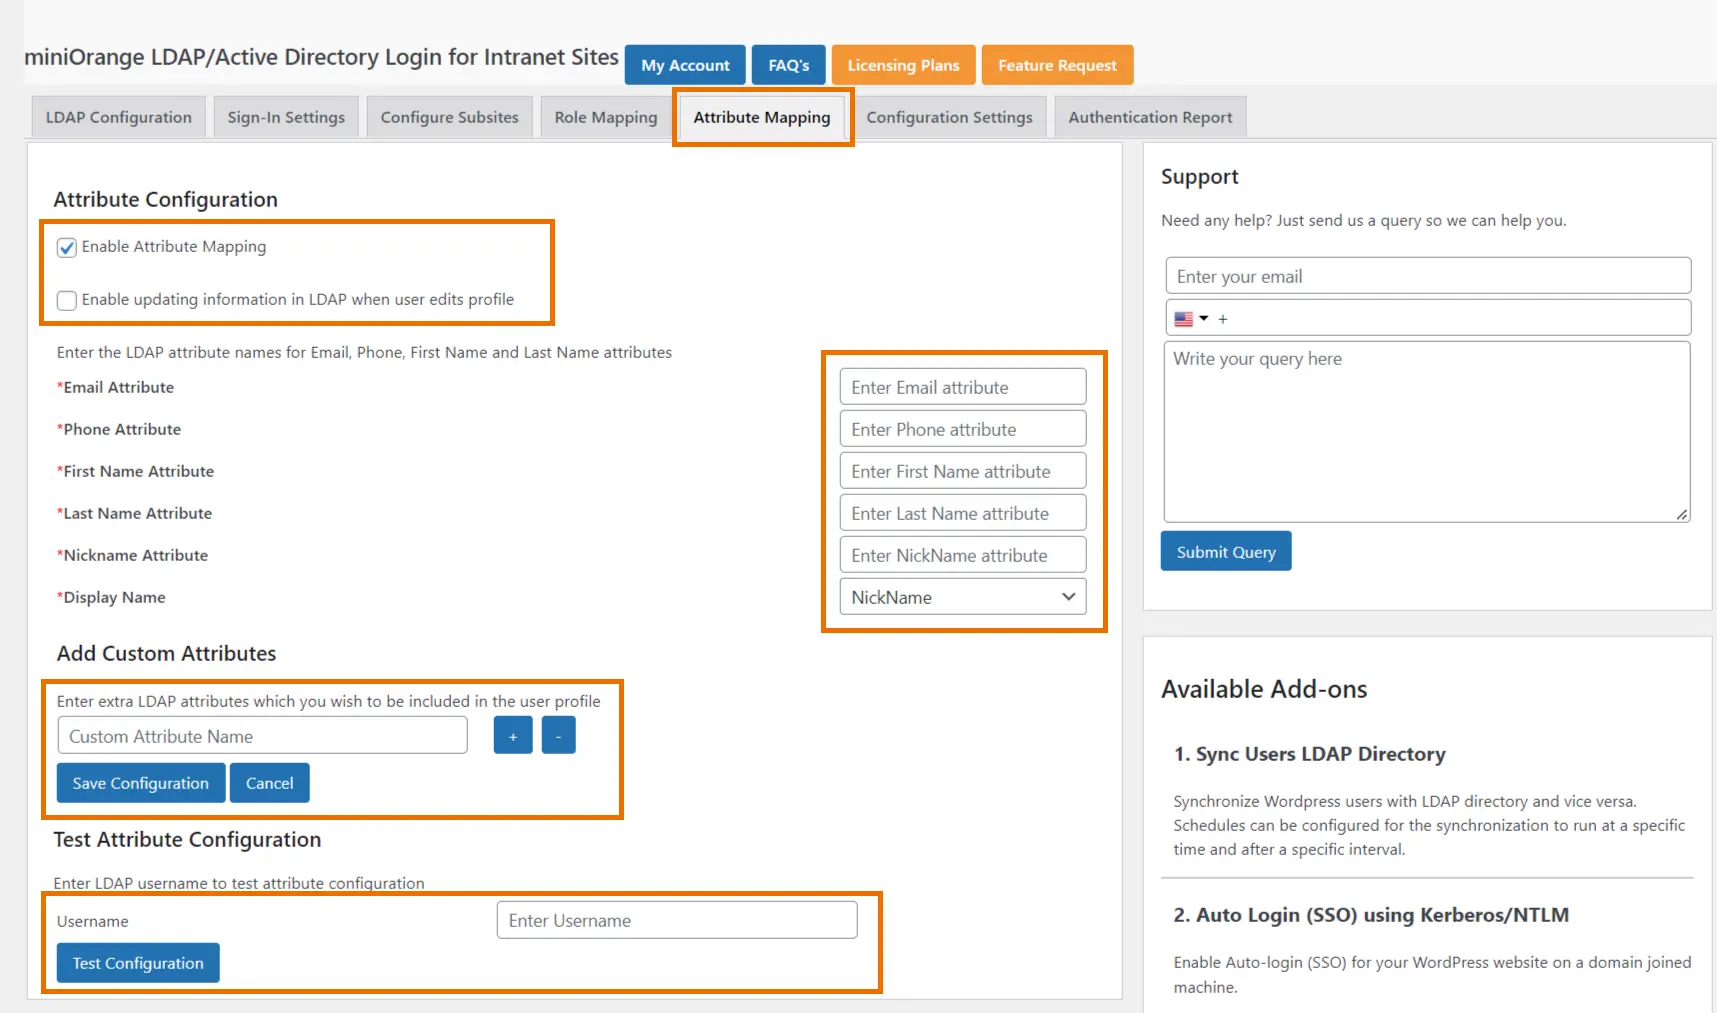 LDAP/Active Directory Login for Intranet multisite plugin Attribute Mapping Configuration